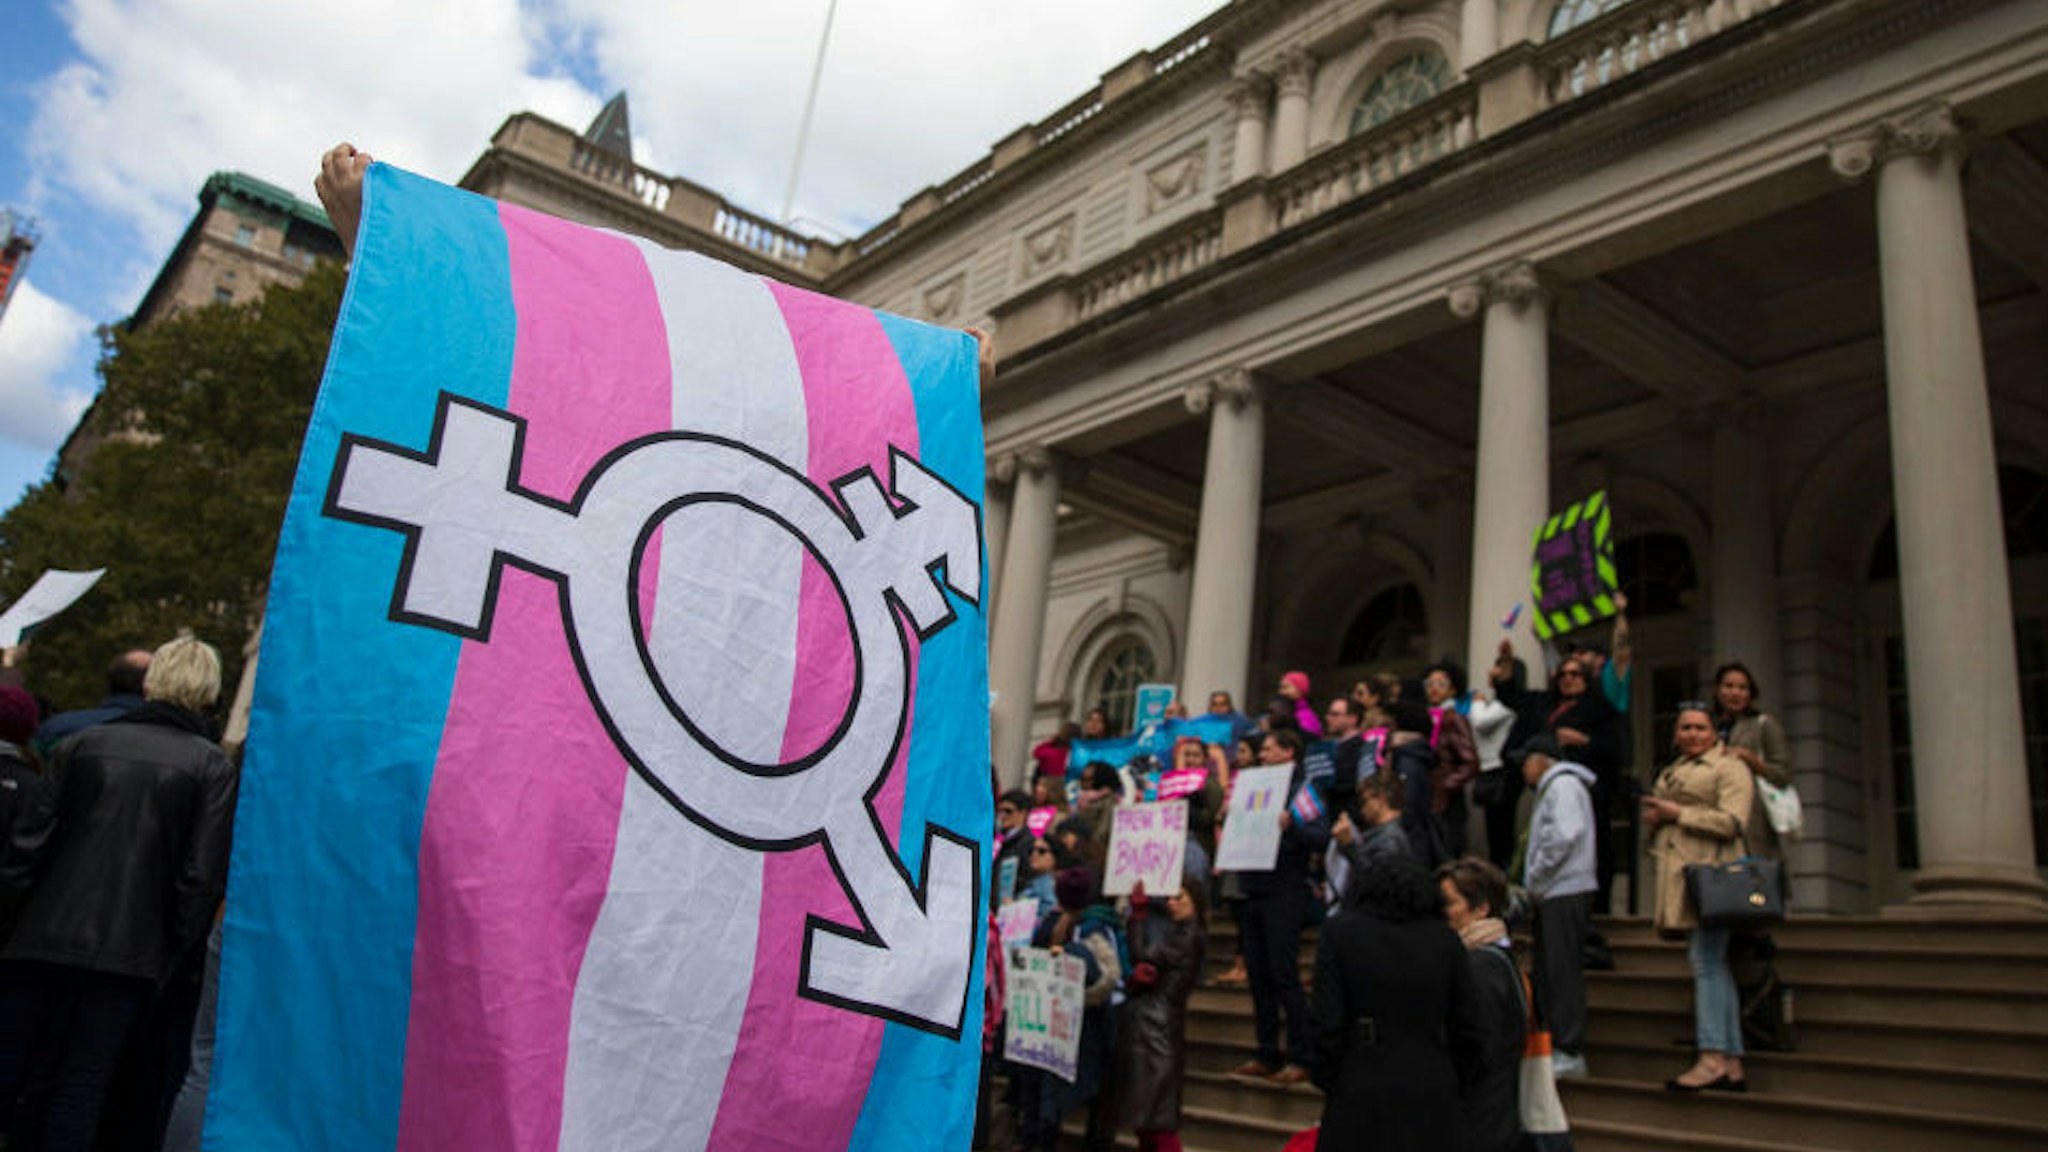 L.G.B.T. activists and their supporters rally in support of transgender people on the steps of New York City Hall, October 24, 2018 in New York City. The group gathered to speak out against the Trump administration's stance toward transgender people. Last week, The New York Times reported on an unreleased administration memo that proposes a strict biological definition of gender based on a person's genitalia at birth. (Photo by Drew Angerer/Getty Images)